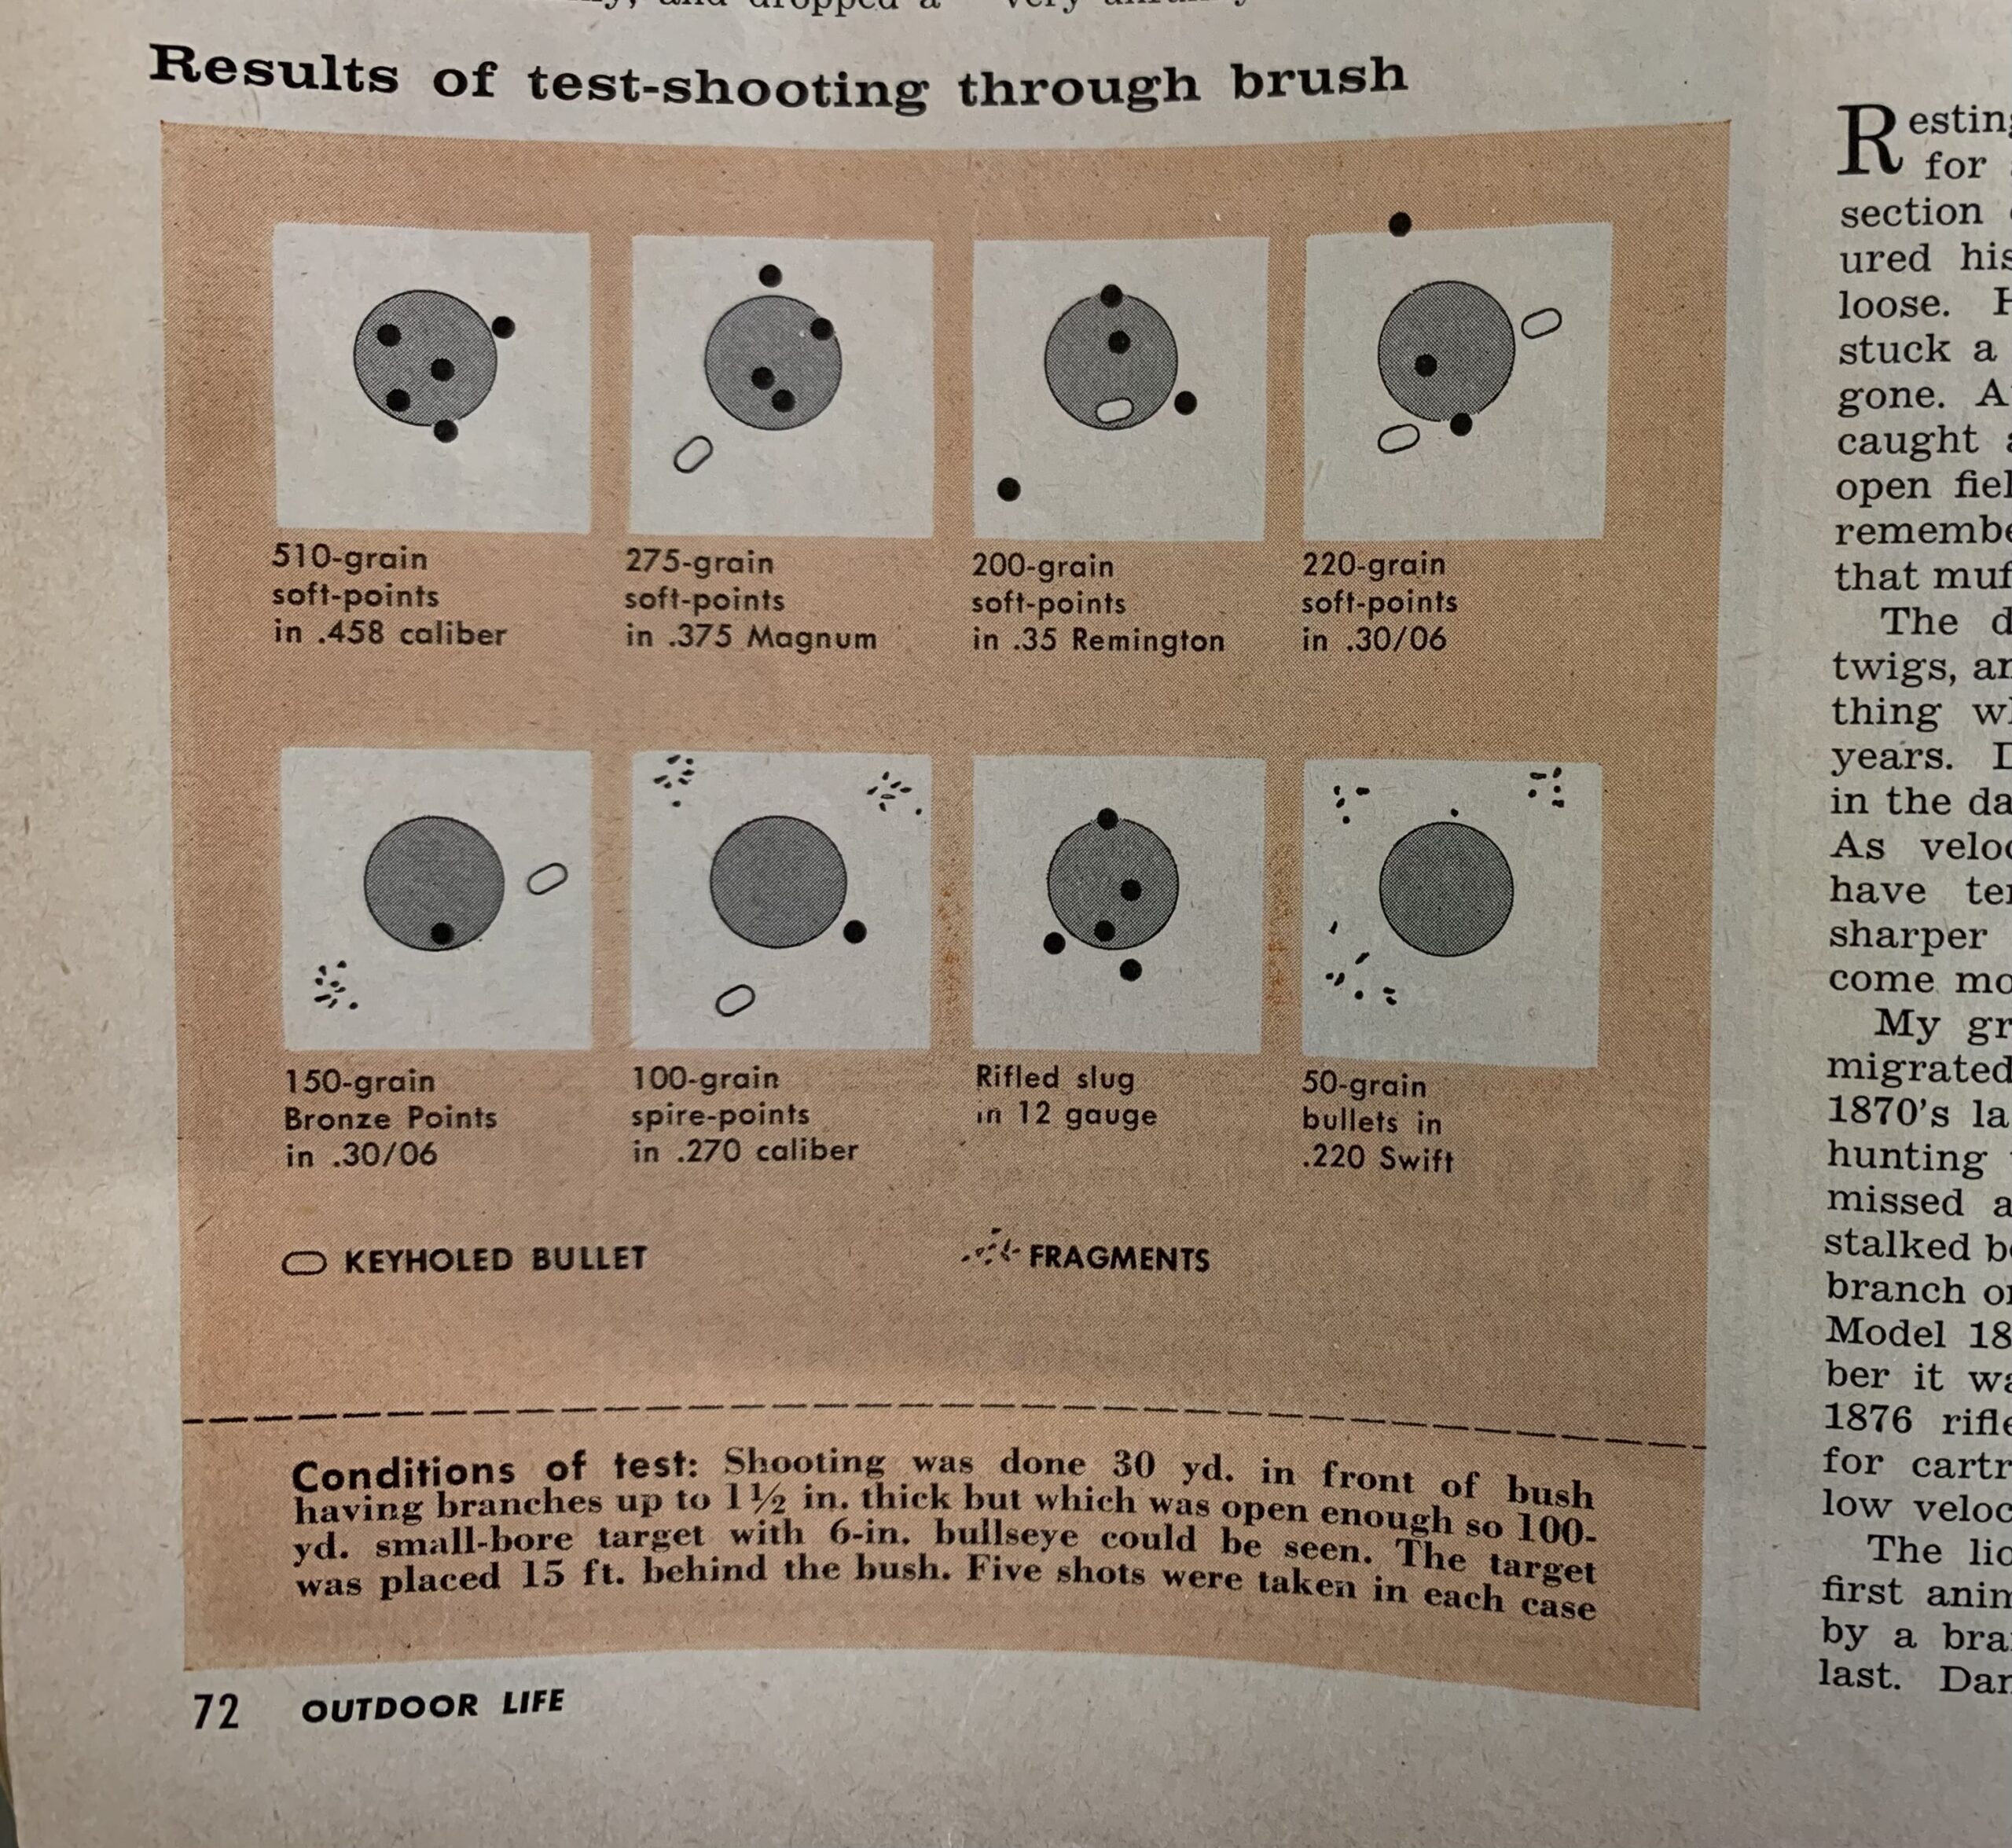 O'Connor's brush bullet test results